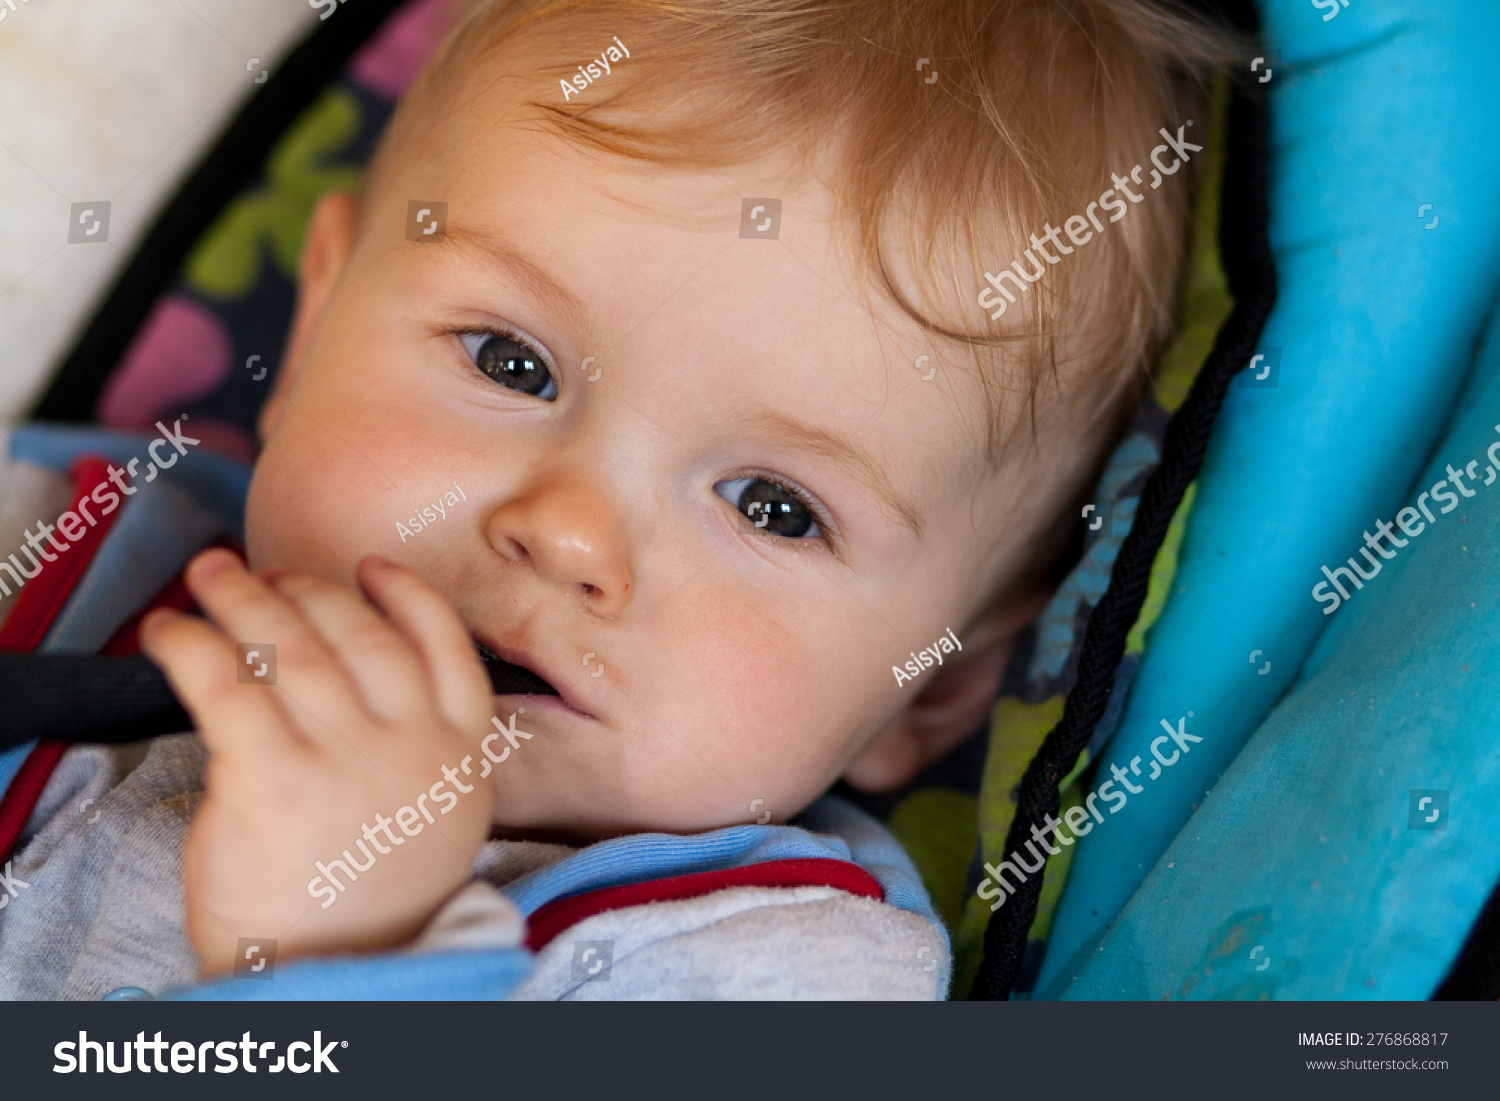 lying baby, smiling baby, baby has something in mouth, hold with teeth, lying in deck chair for baby #276868817